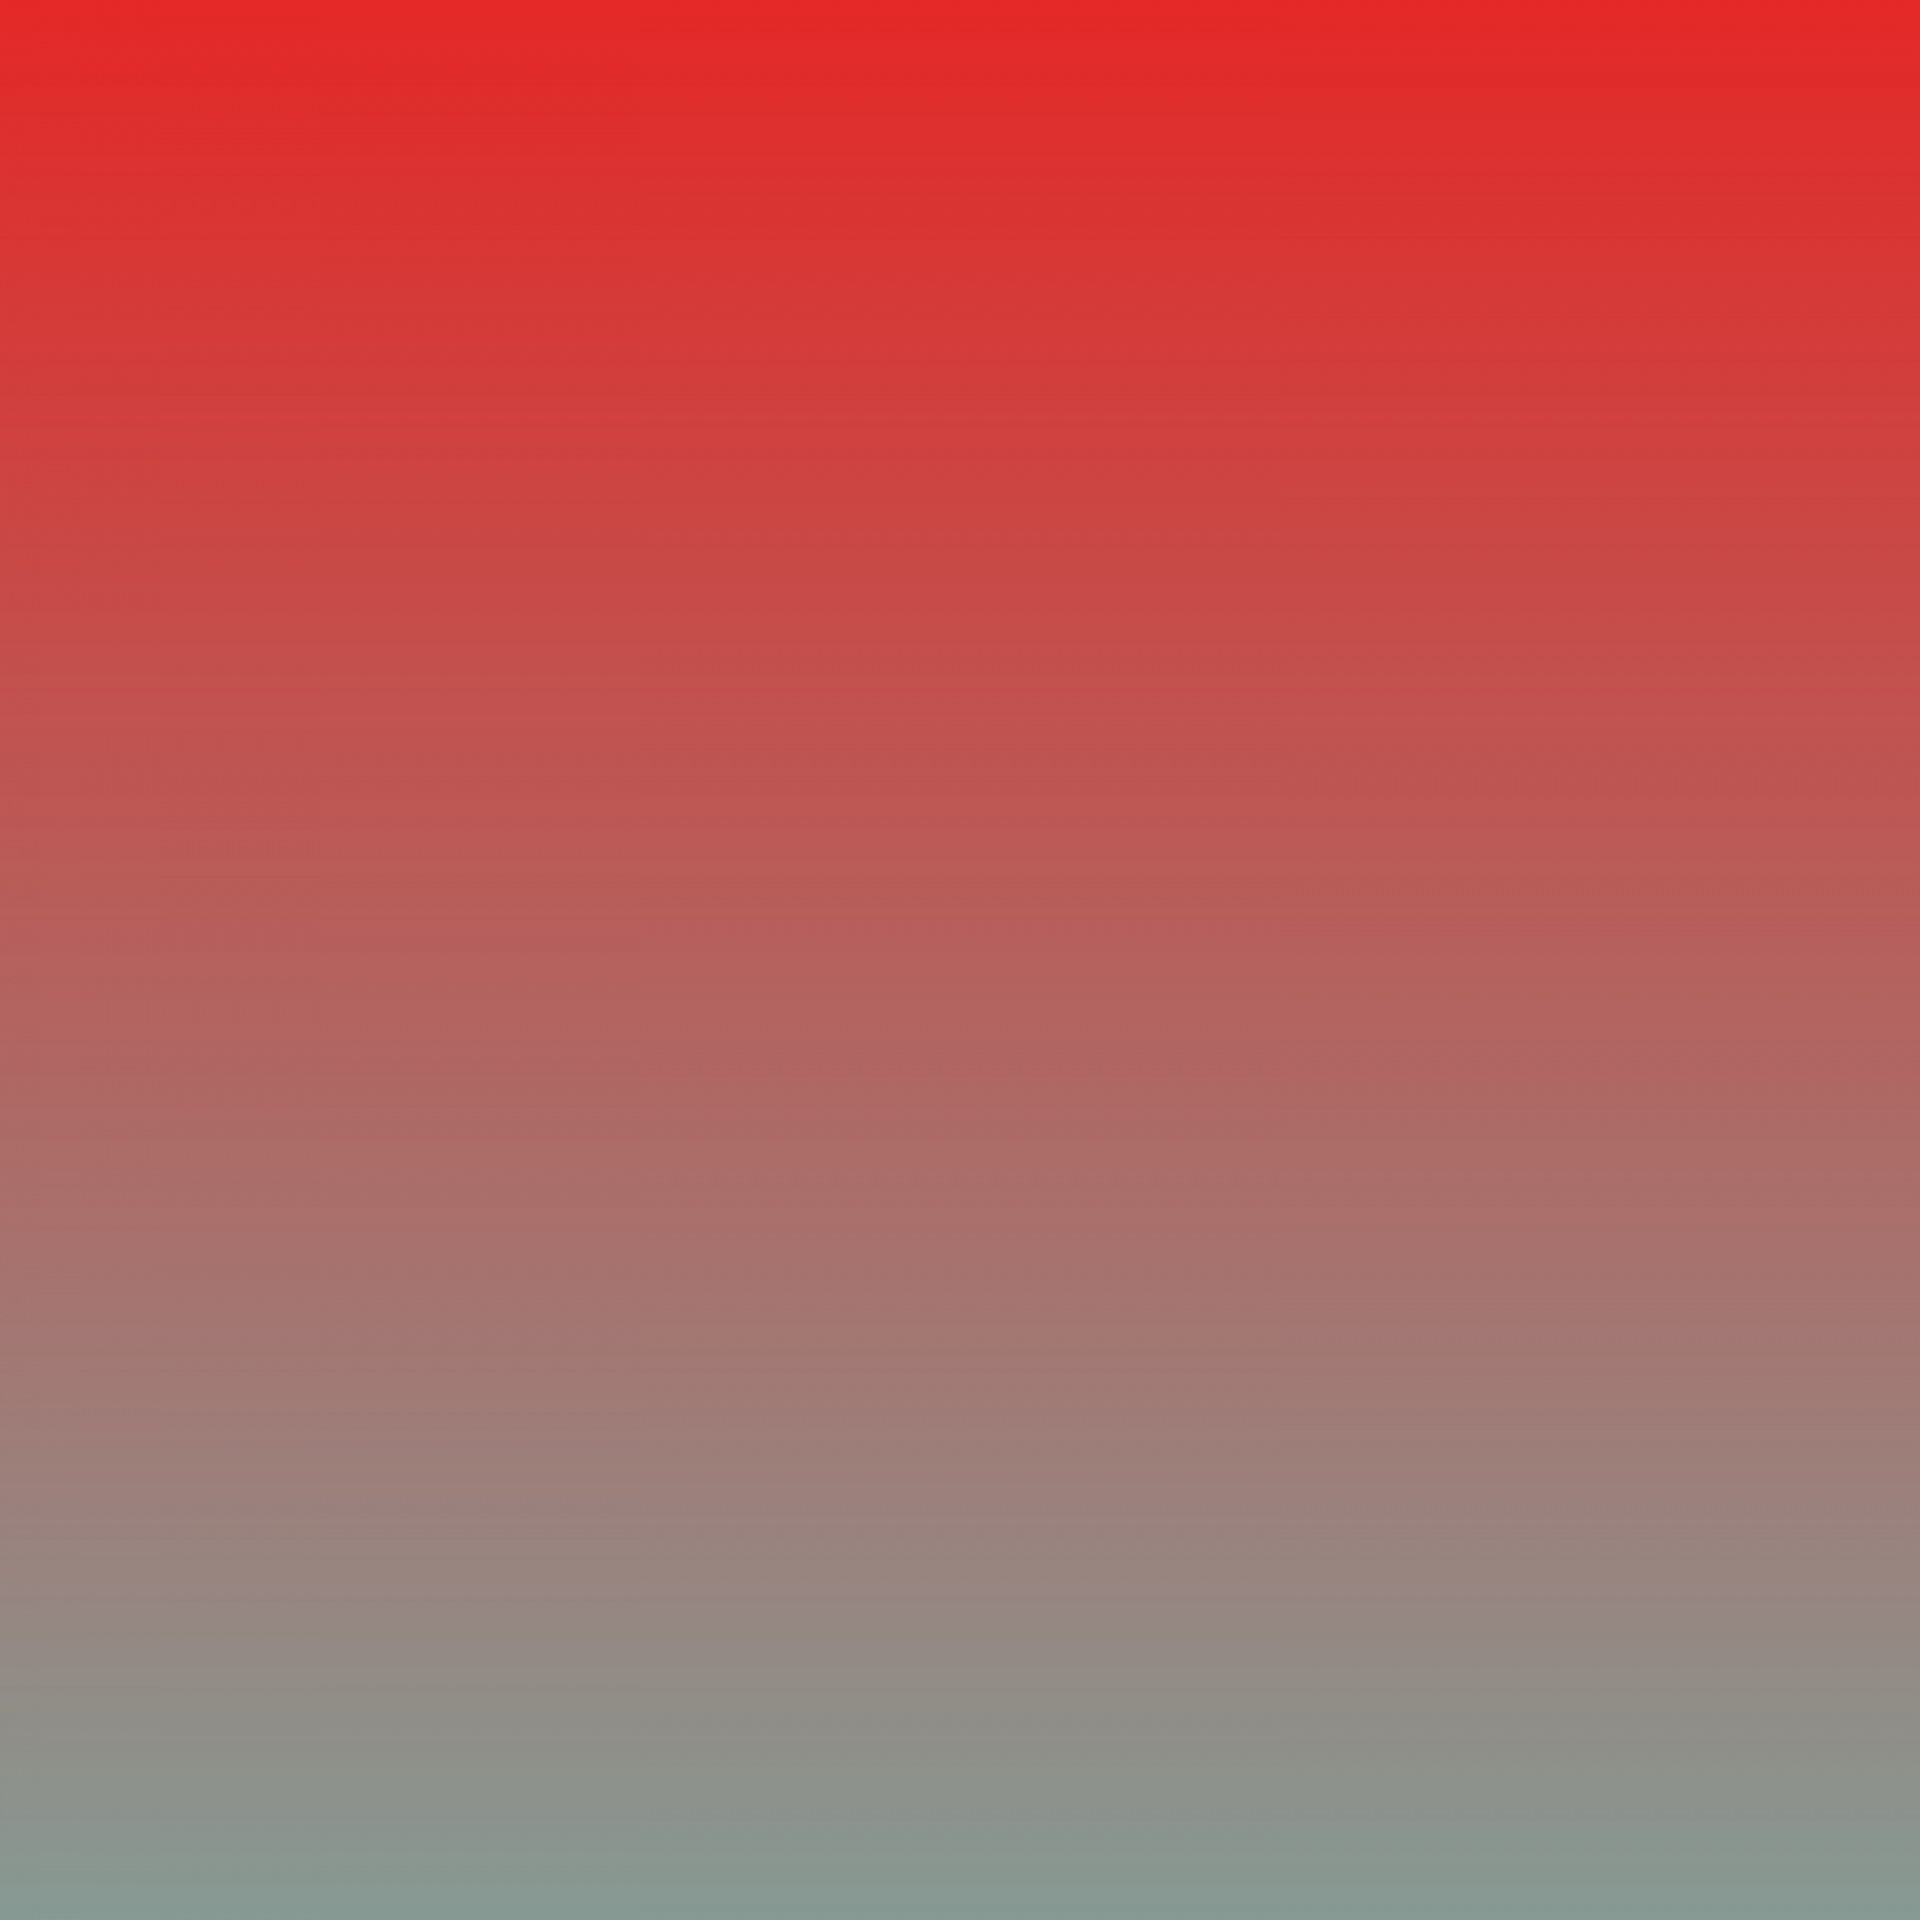 Wallpaper, background, red, grey, color